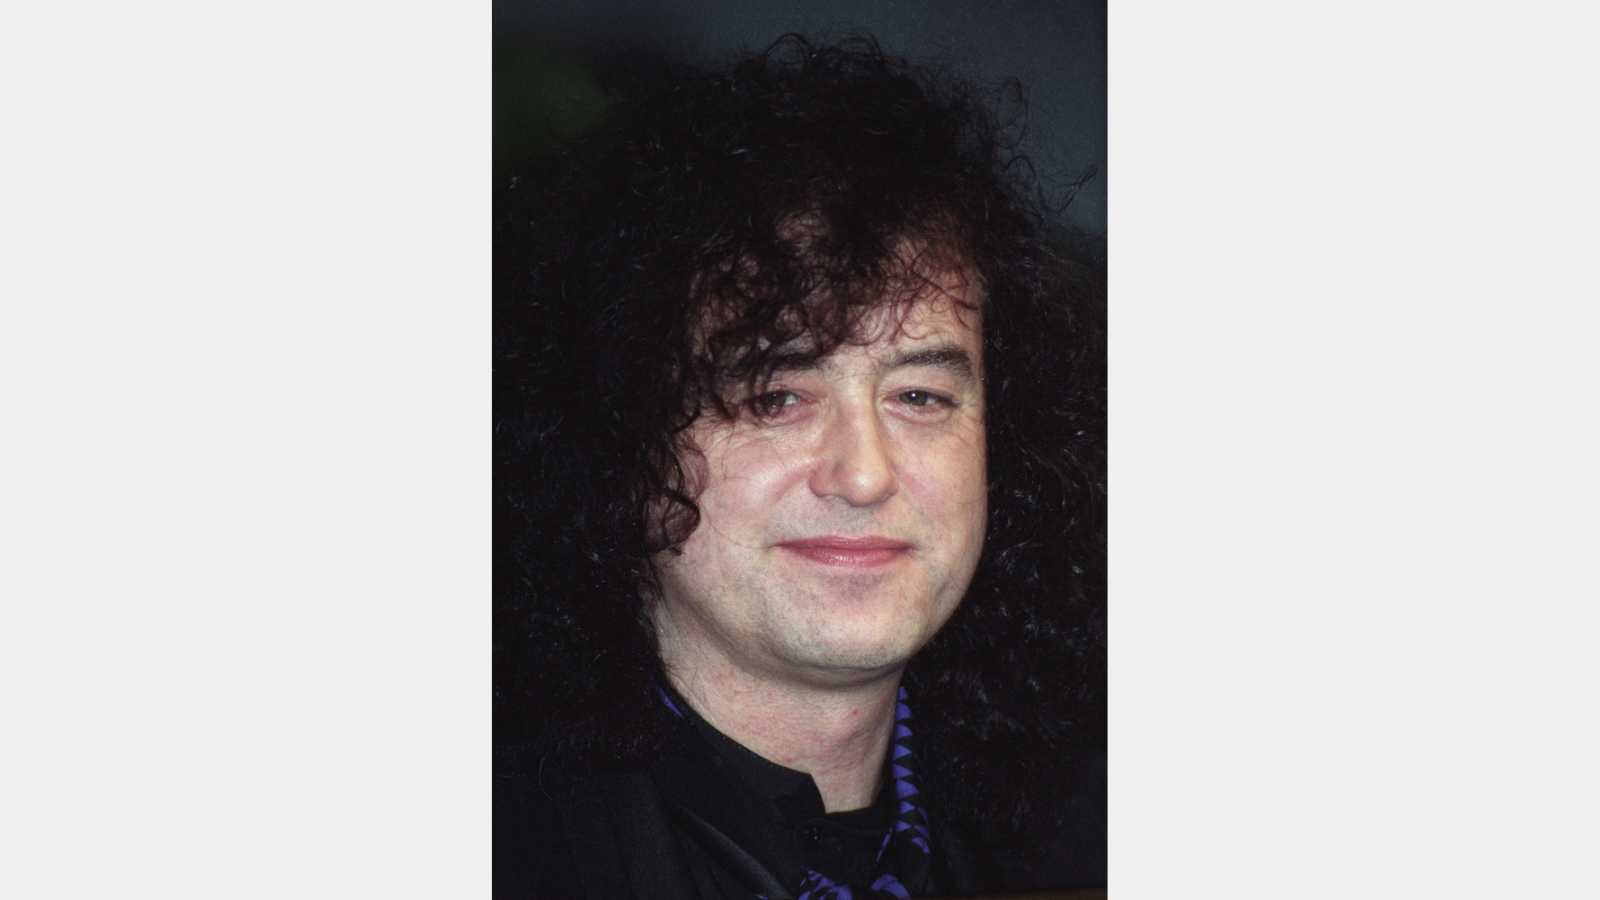 Los Angeles - circa 1993: Rock star Jimmy Page, of the band Led Zeppelin, arrives at The Whiskey a Go-Go nightclub.
